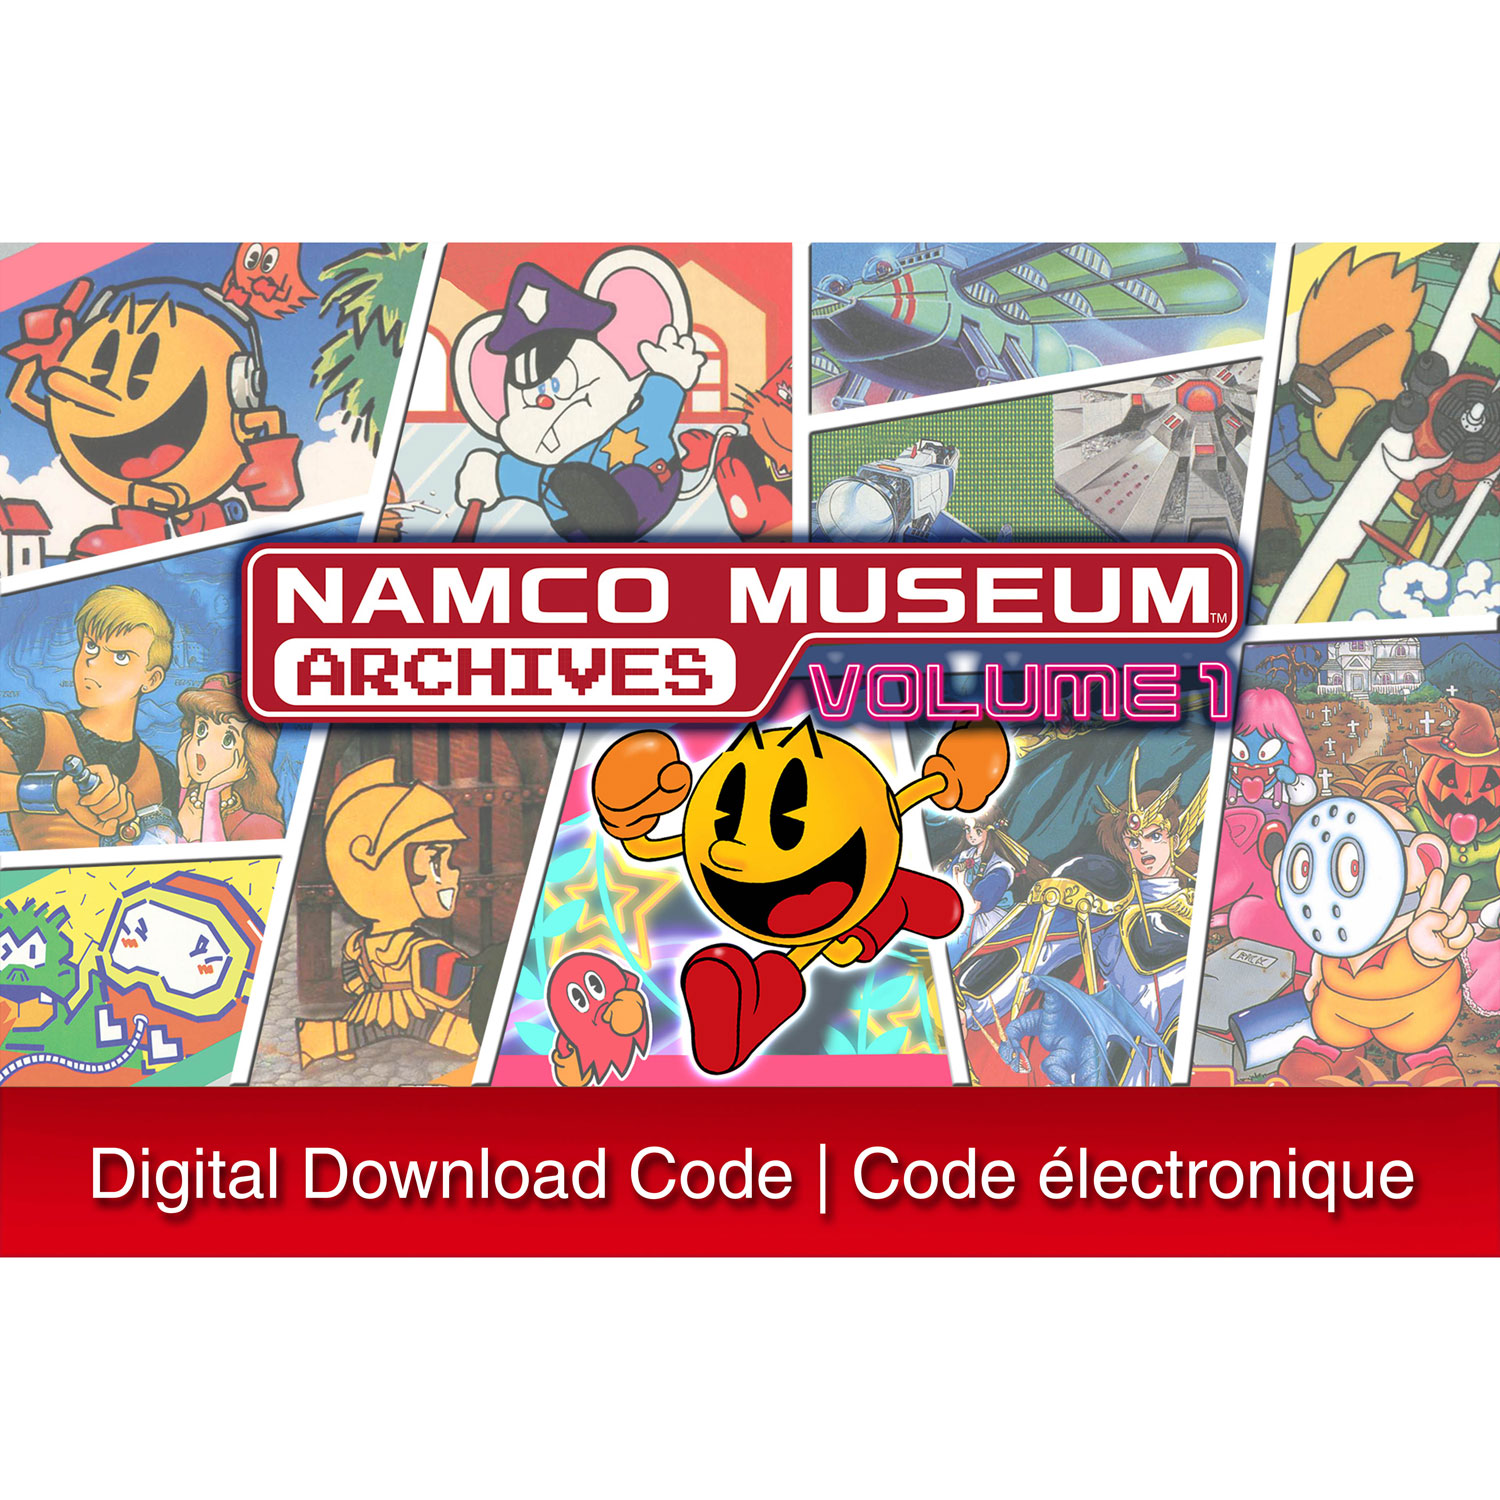 Namco Museum Archives Vol 2 Review (Switch eShop)